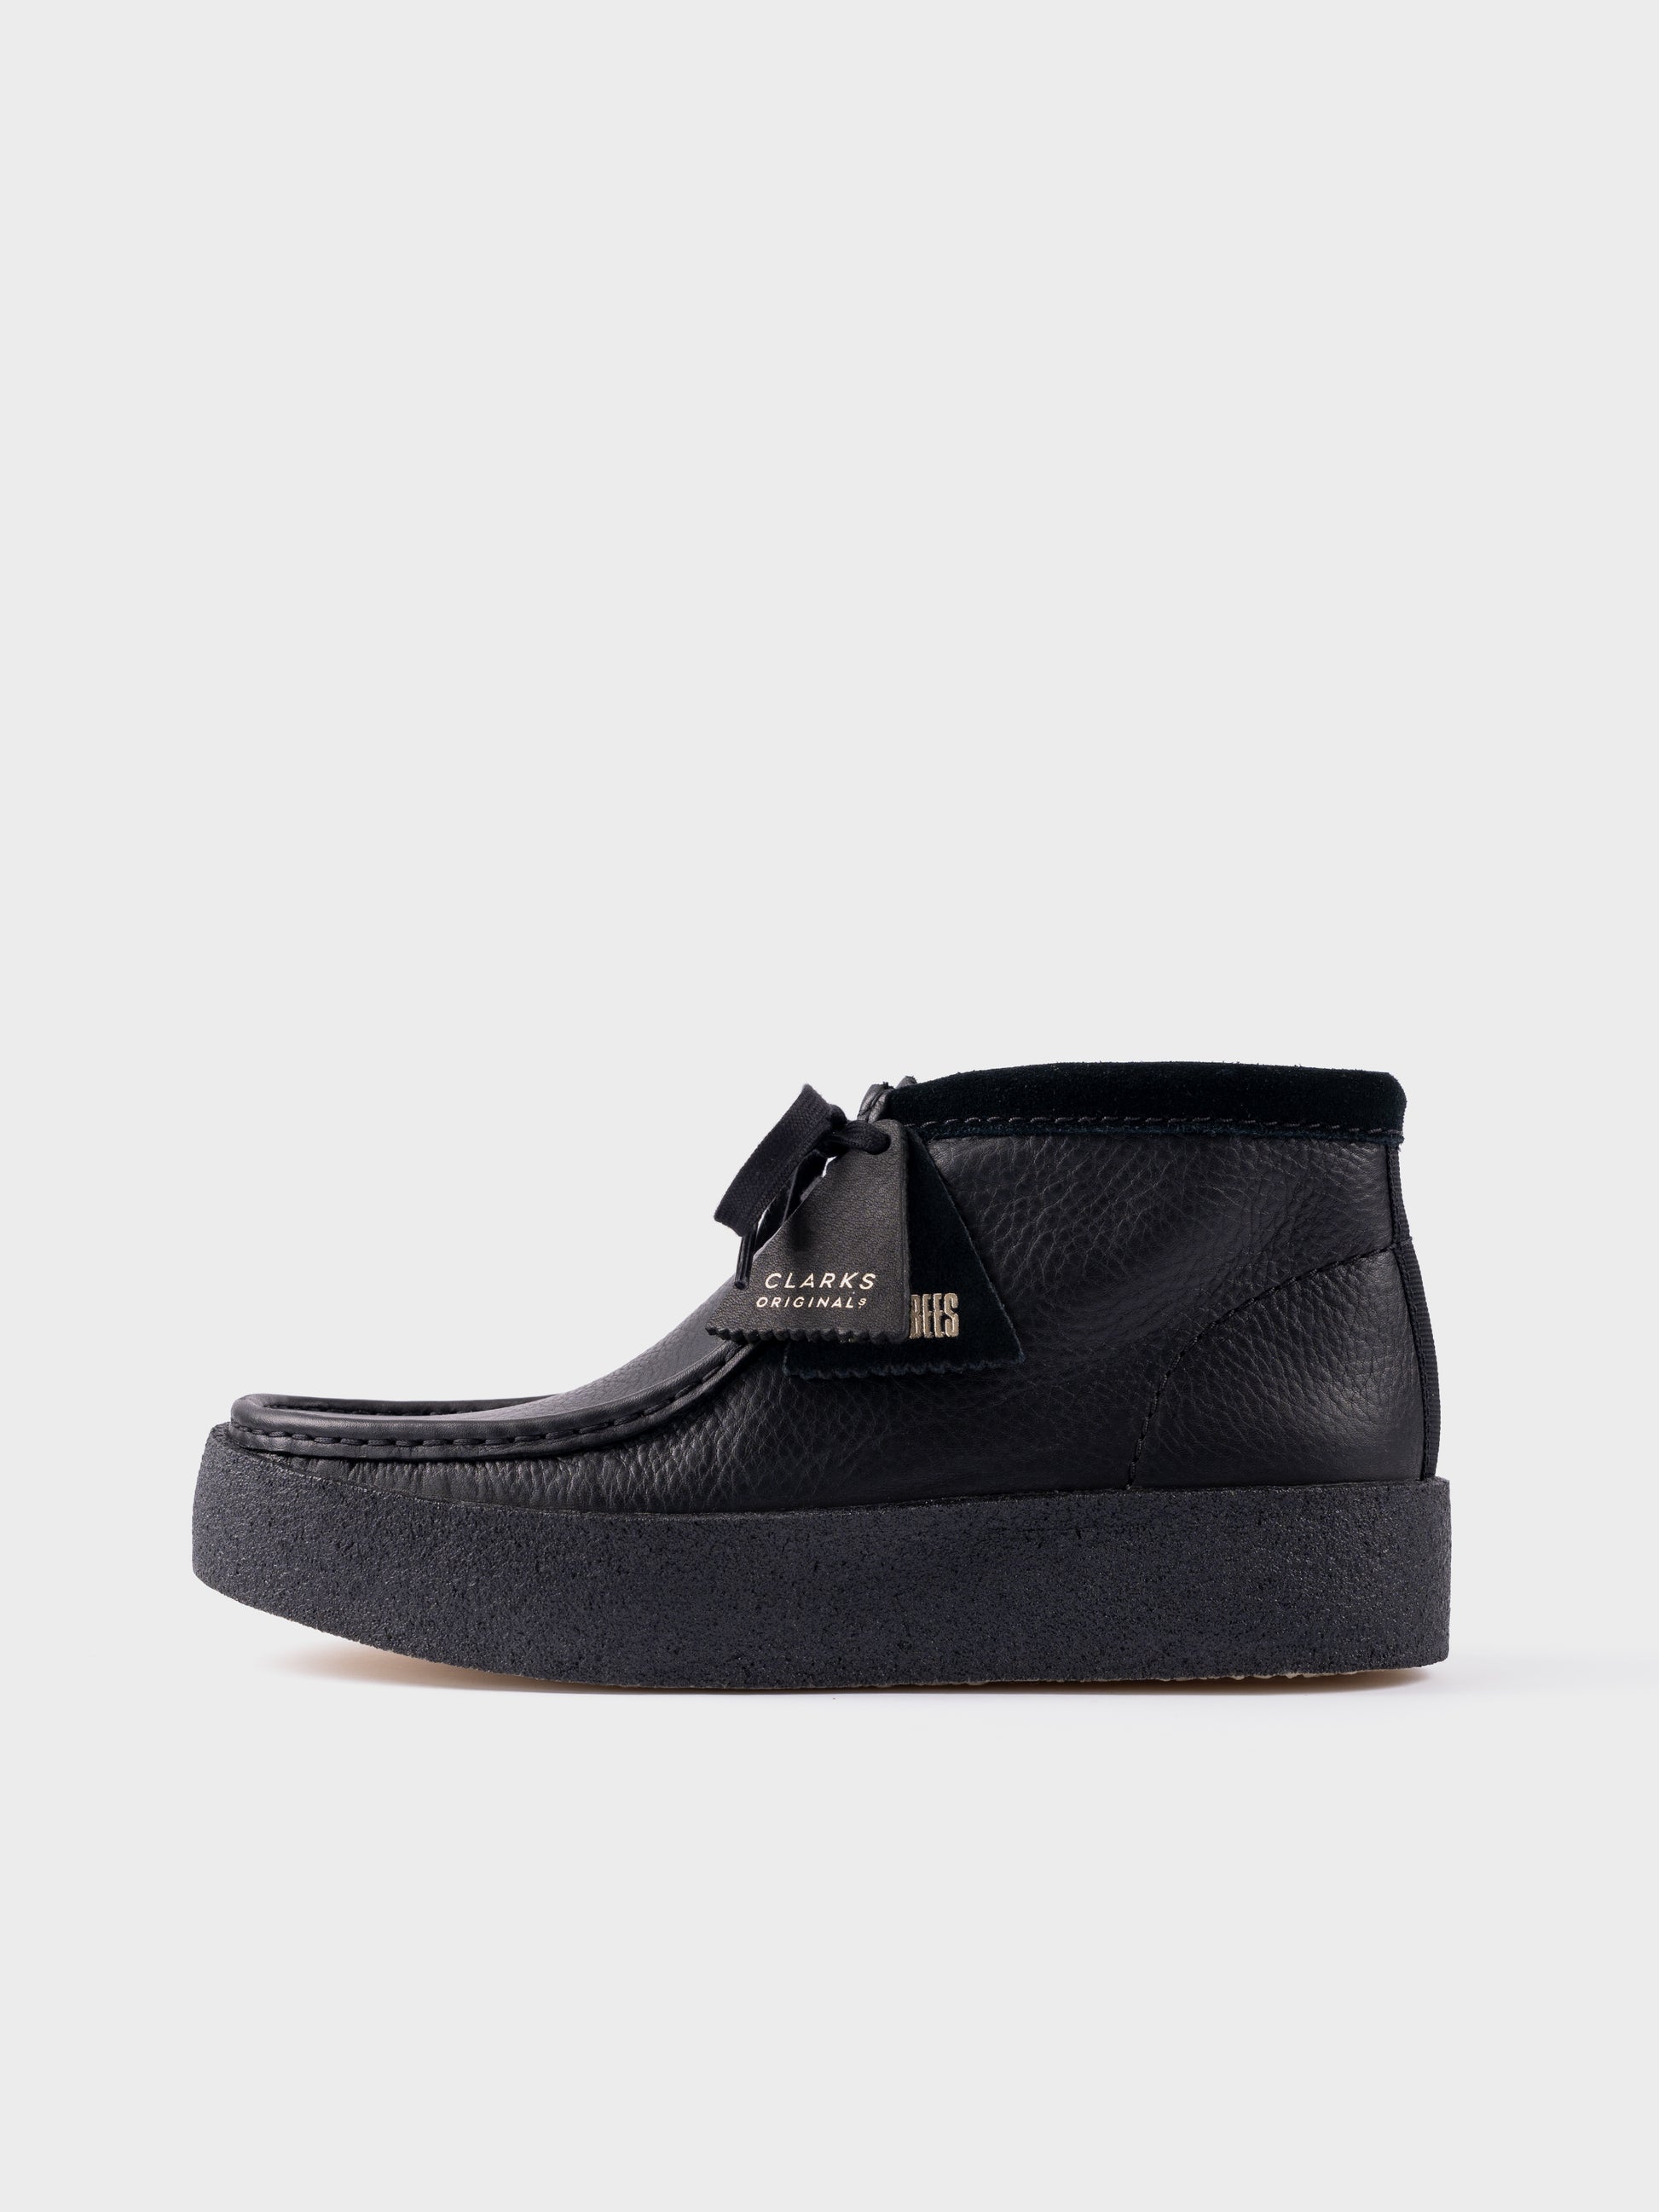 Clarks Originals Wallabee Cup Boots - Black Leather